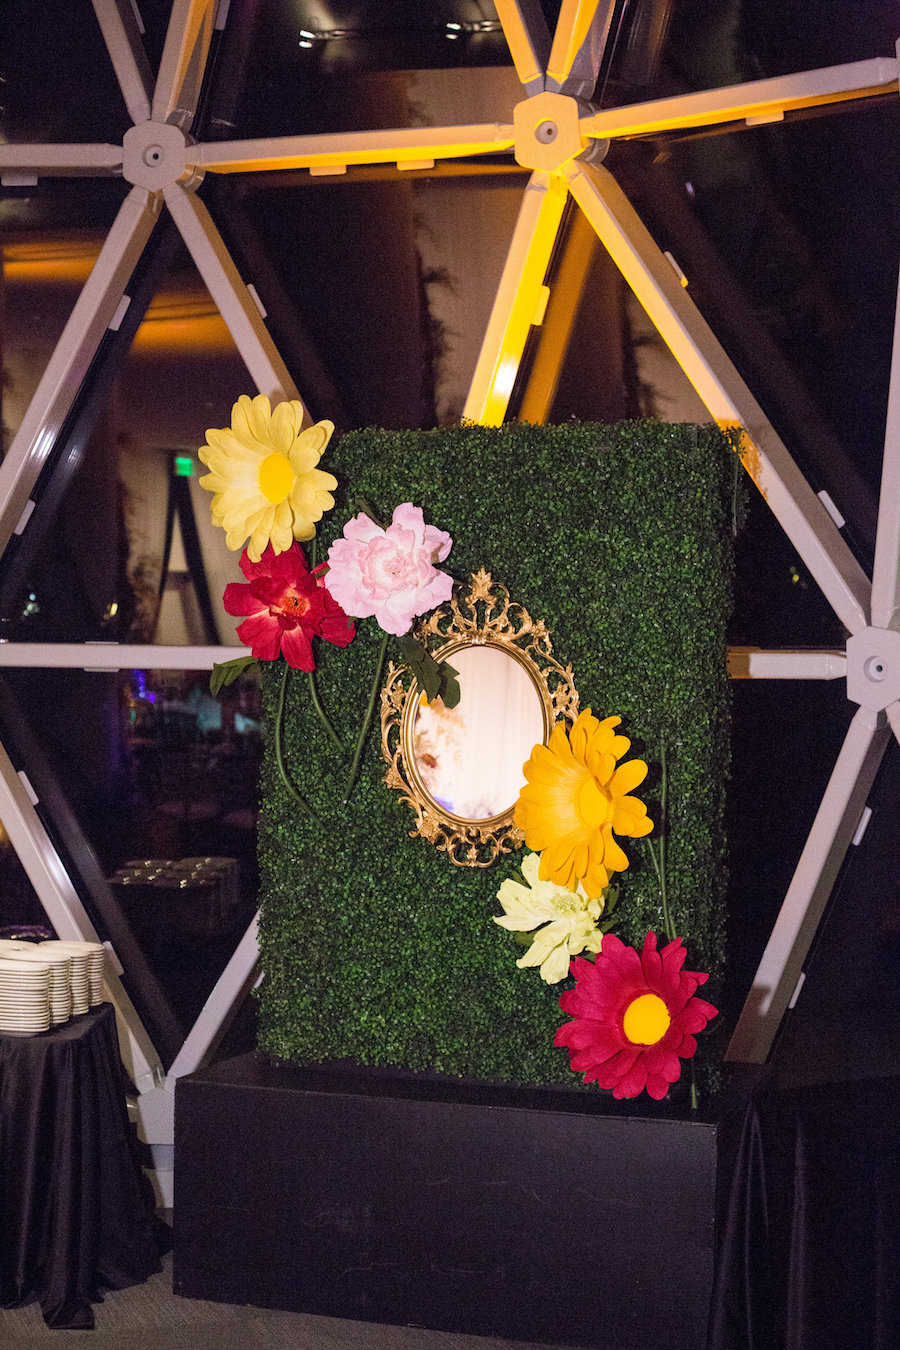 Alice in Wonderland Themed Whimsical Fairytale Wedding Reception Decor with Big Colorful Yellow and Red Paper Flowers with Green Grass Wall and Mirror | St. Petersburg Wedding Planner UNIQUE Weddings & Events